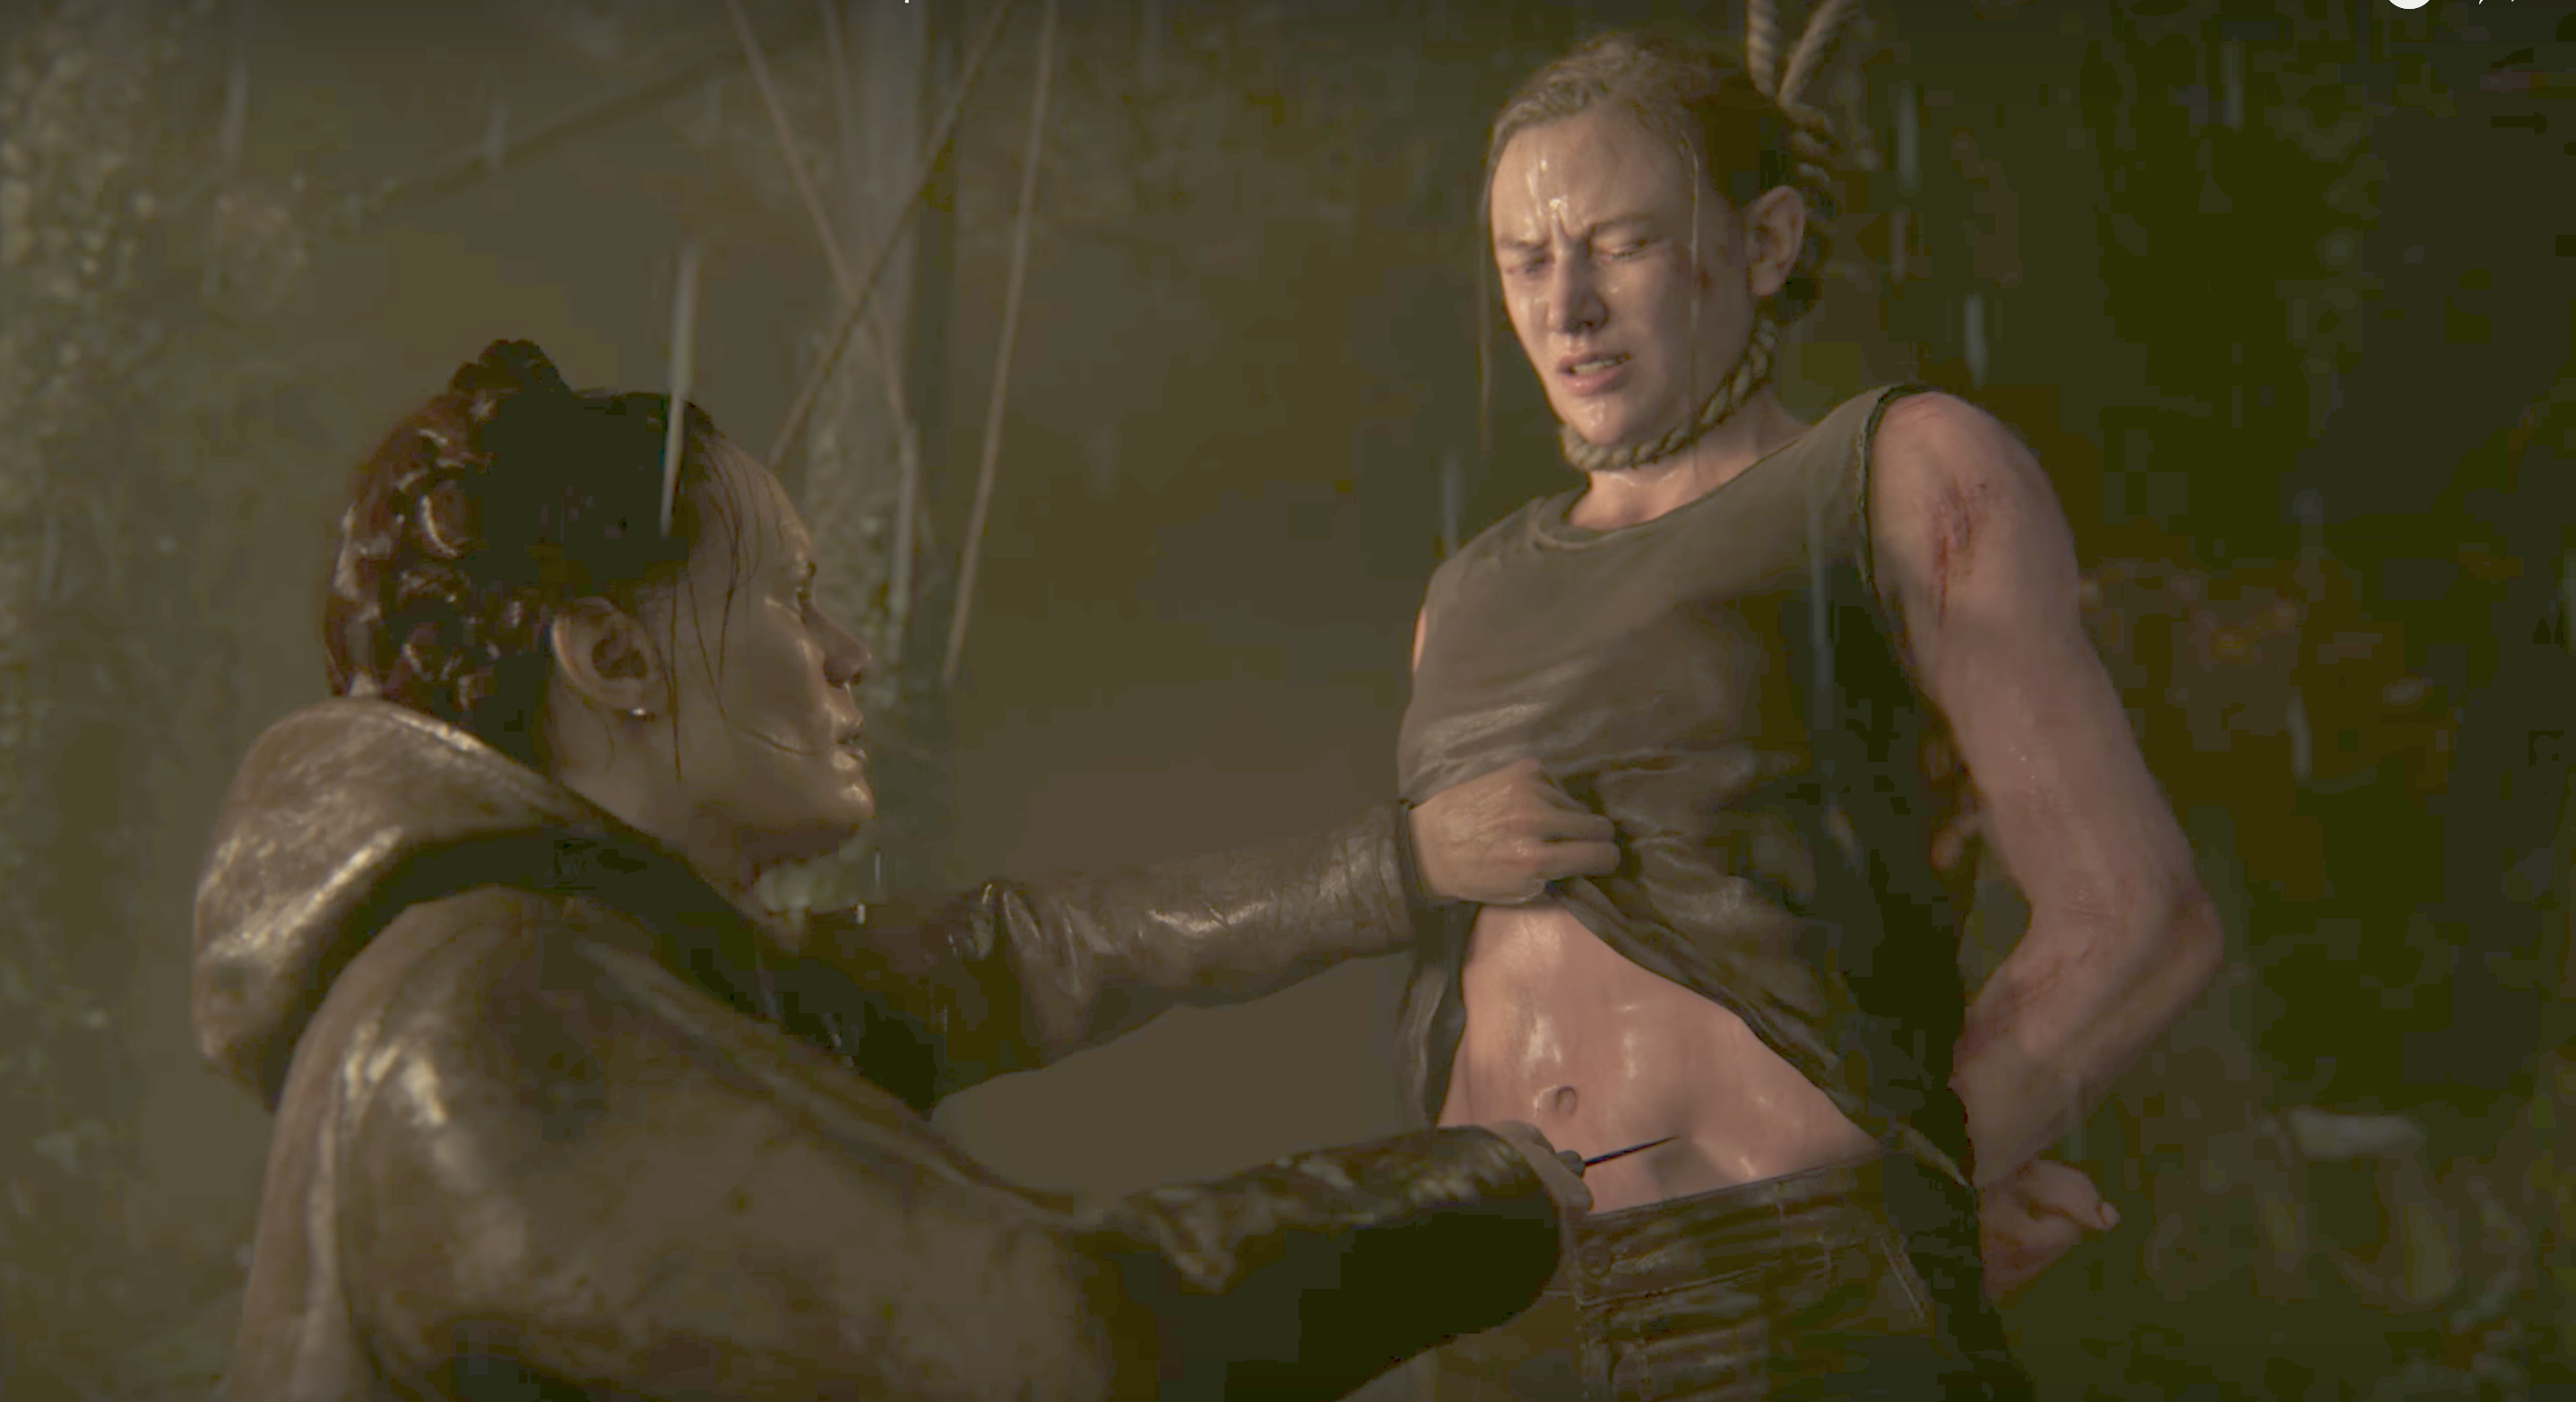 The Last of Us Part II Shows a Gender Double Standard for Violence